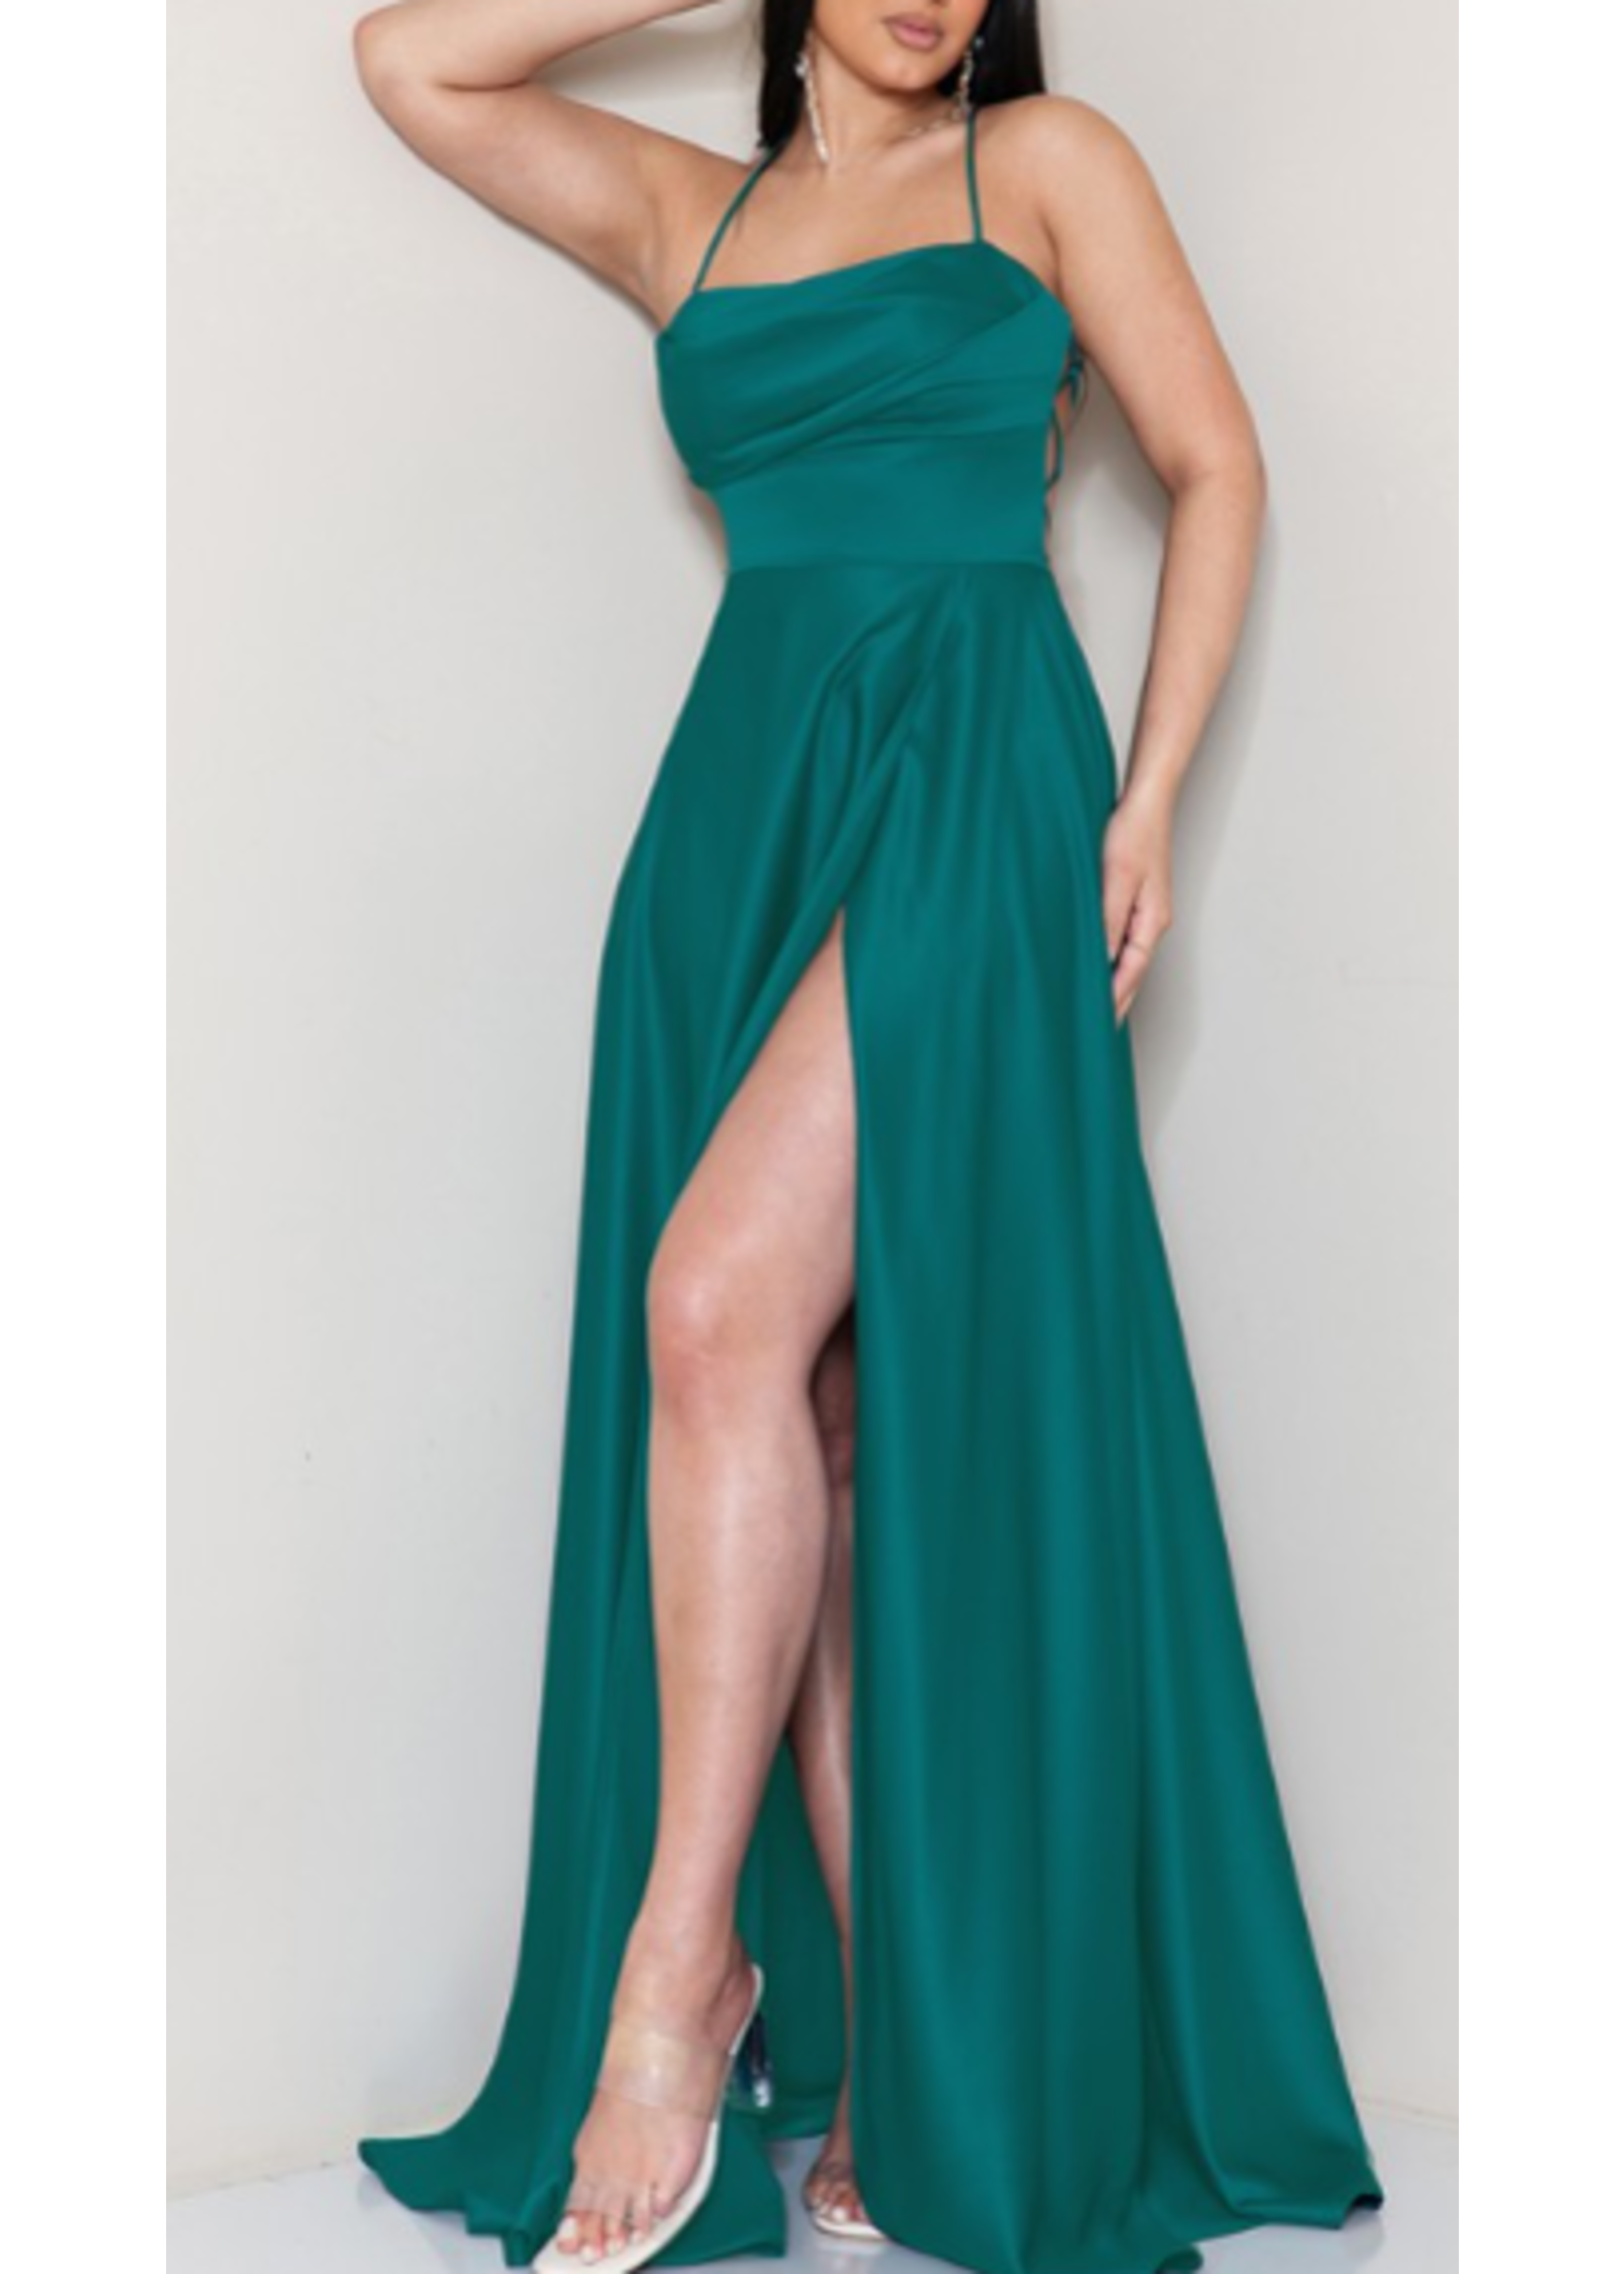 MNMF21718 - SPAGHETTI THIN STRAP GOWN W HIGH  SLIT AND CORSET TIE BACK